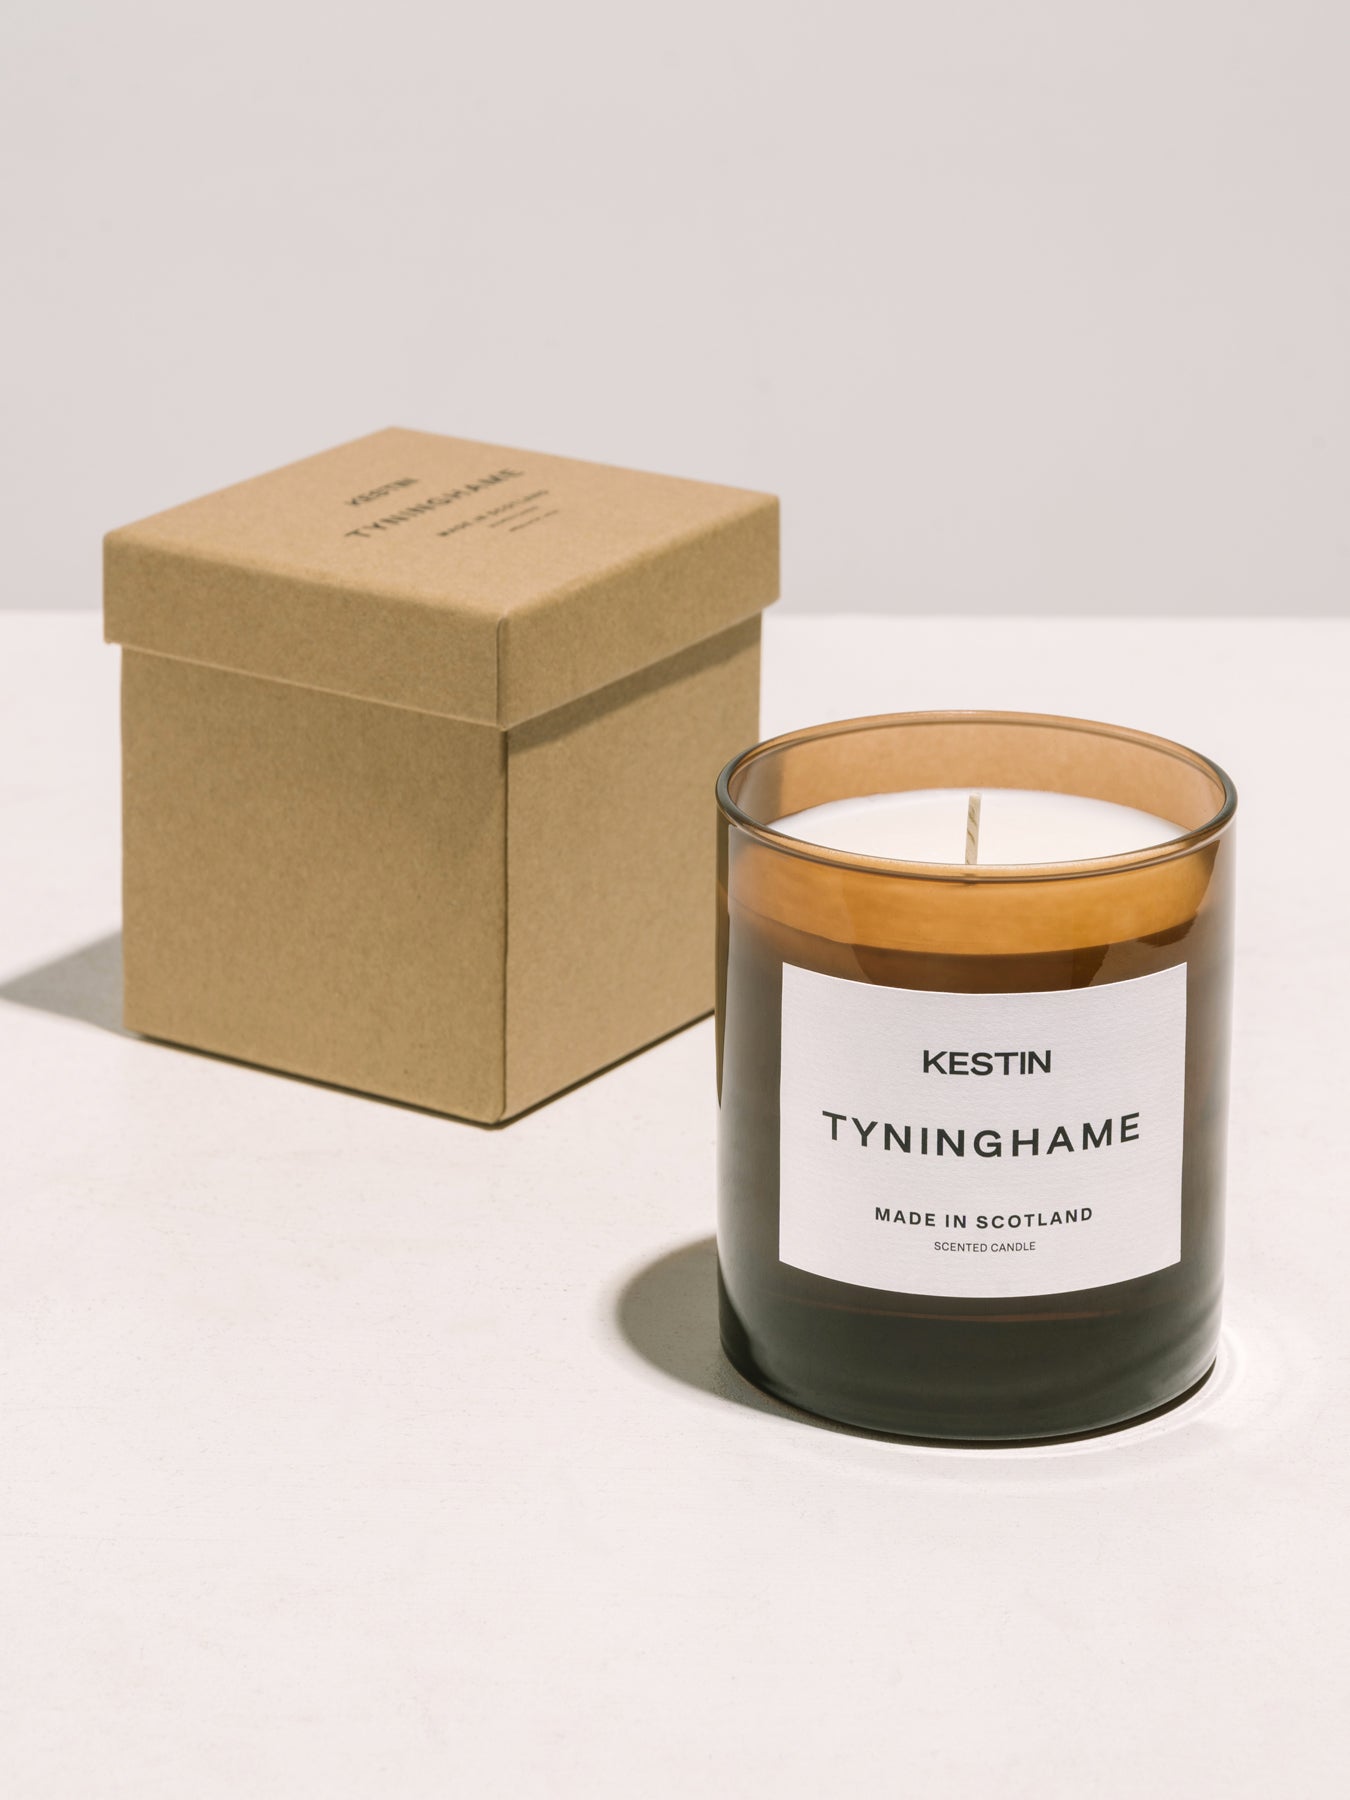 Tyninghame Scented Candle (Limited Edition)